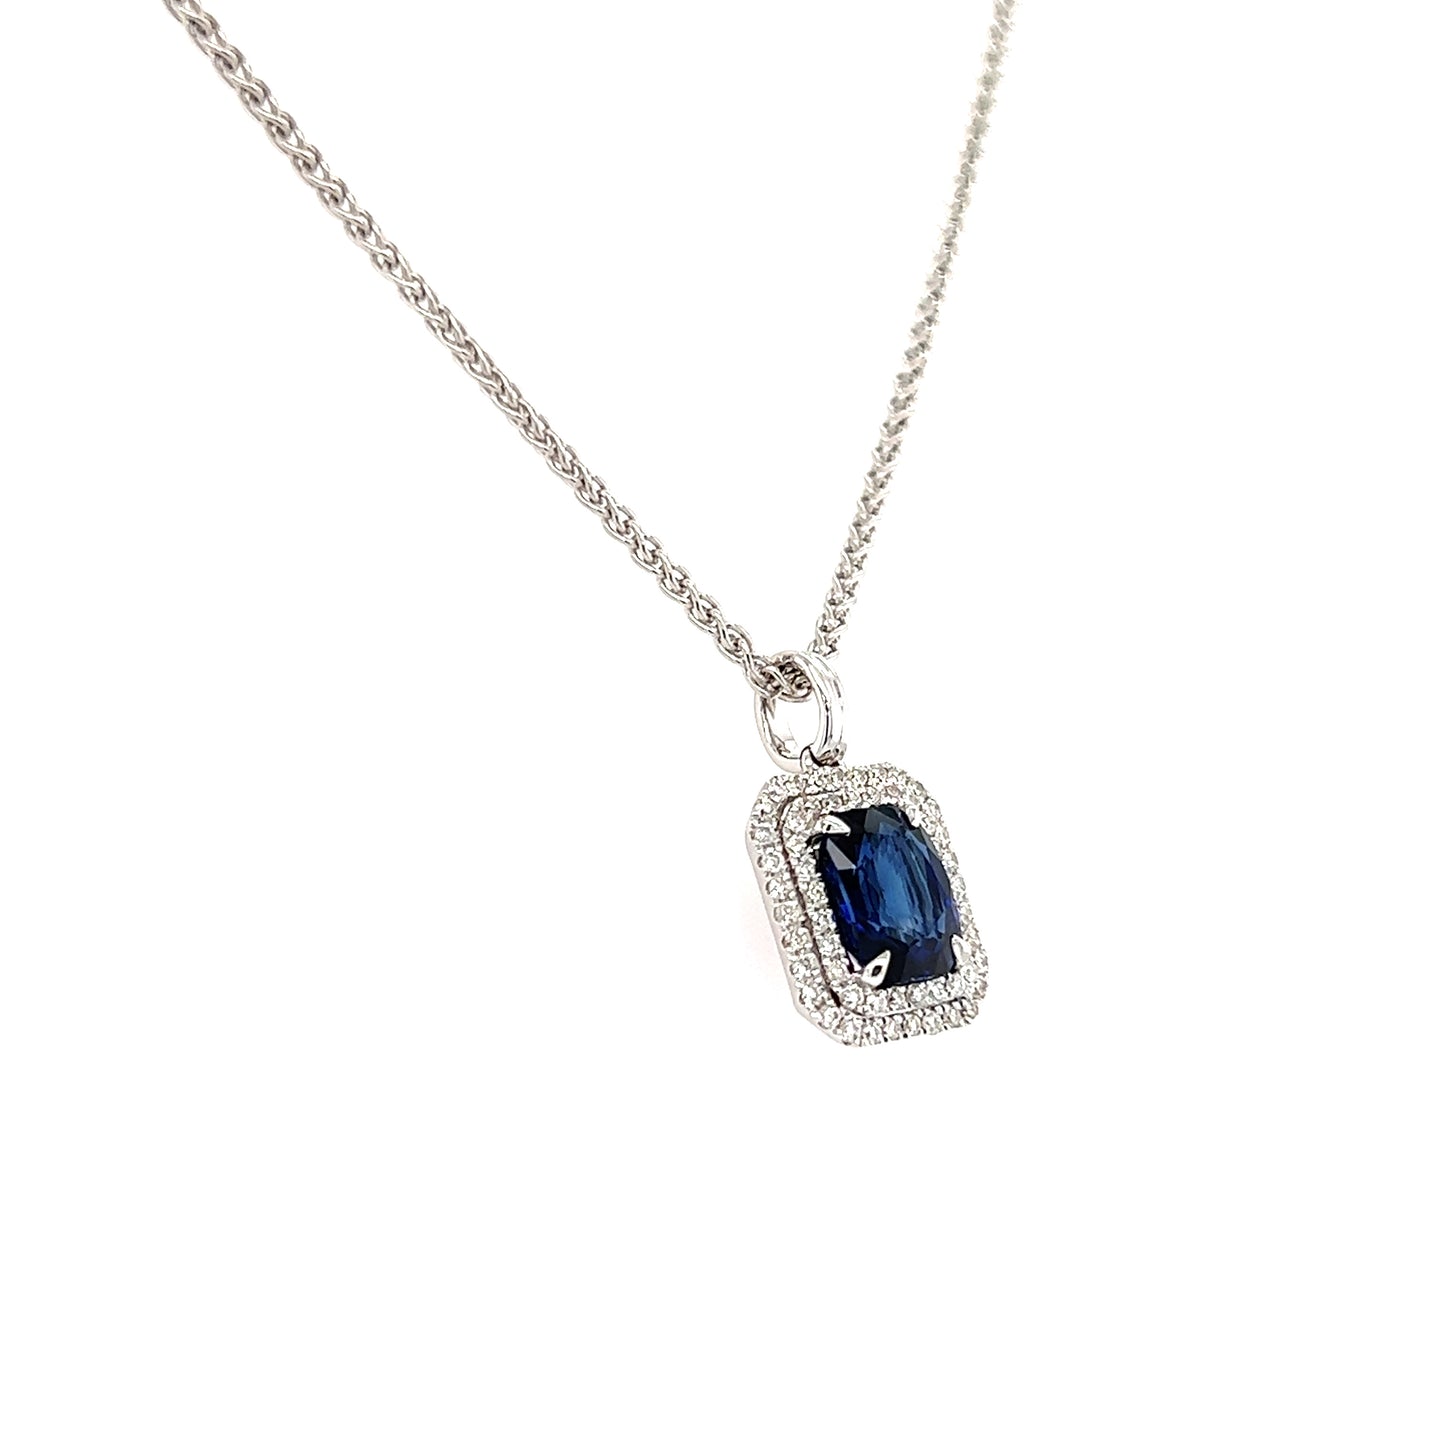 Cushion Sapphire Pendant with Double Diamond Halo in 18K White Gold Pendant and Chain Right Side View